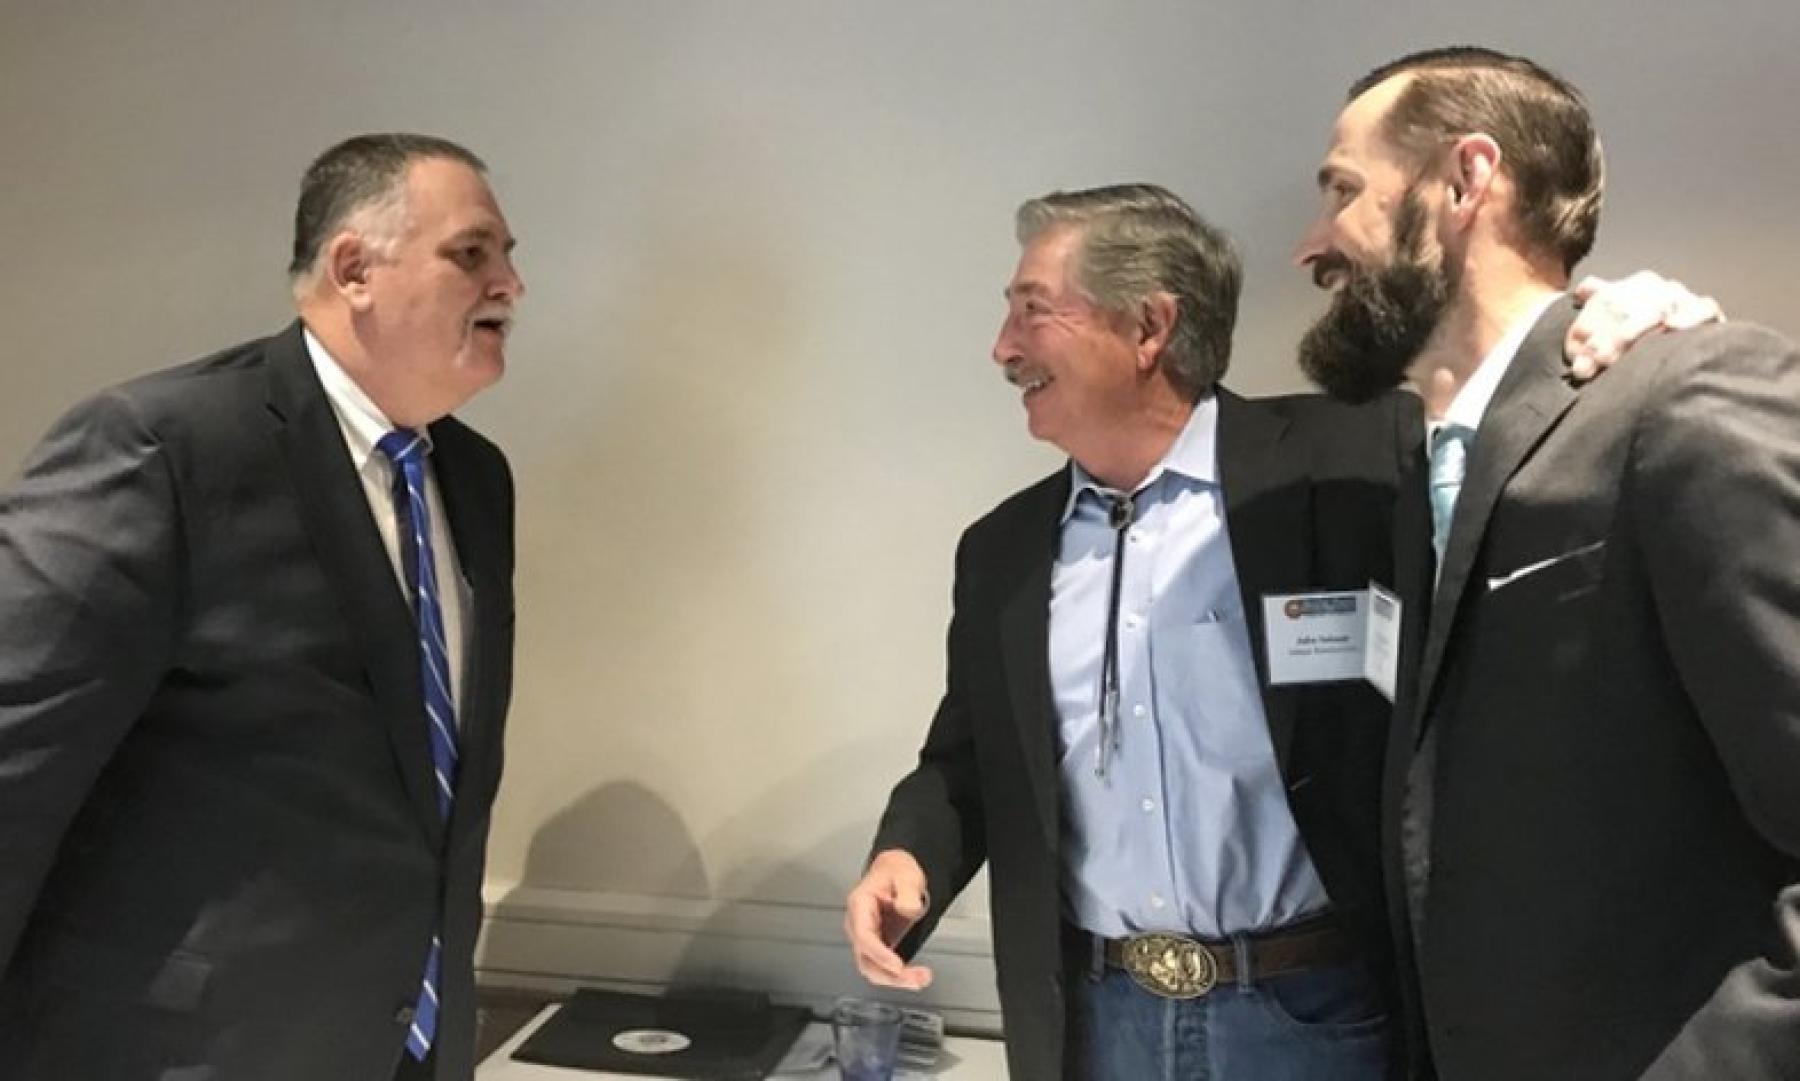 The Subsurface Irrigation Efficiency Project or SIEP sponsored a panel updating the Colorado Water Plan and its funding initiative. Prior to the forum, two of the panel participants, Terry Fankhouser, left, with the Colorado Cattlemen's Association, and water expert James Eklund, right, joke with John Salazar, center, about facial hair. Salazar is a former state agricultural commissioner. (Photo by Lynn Bartels)